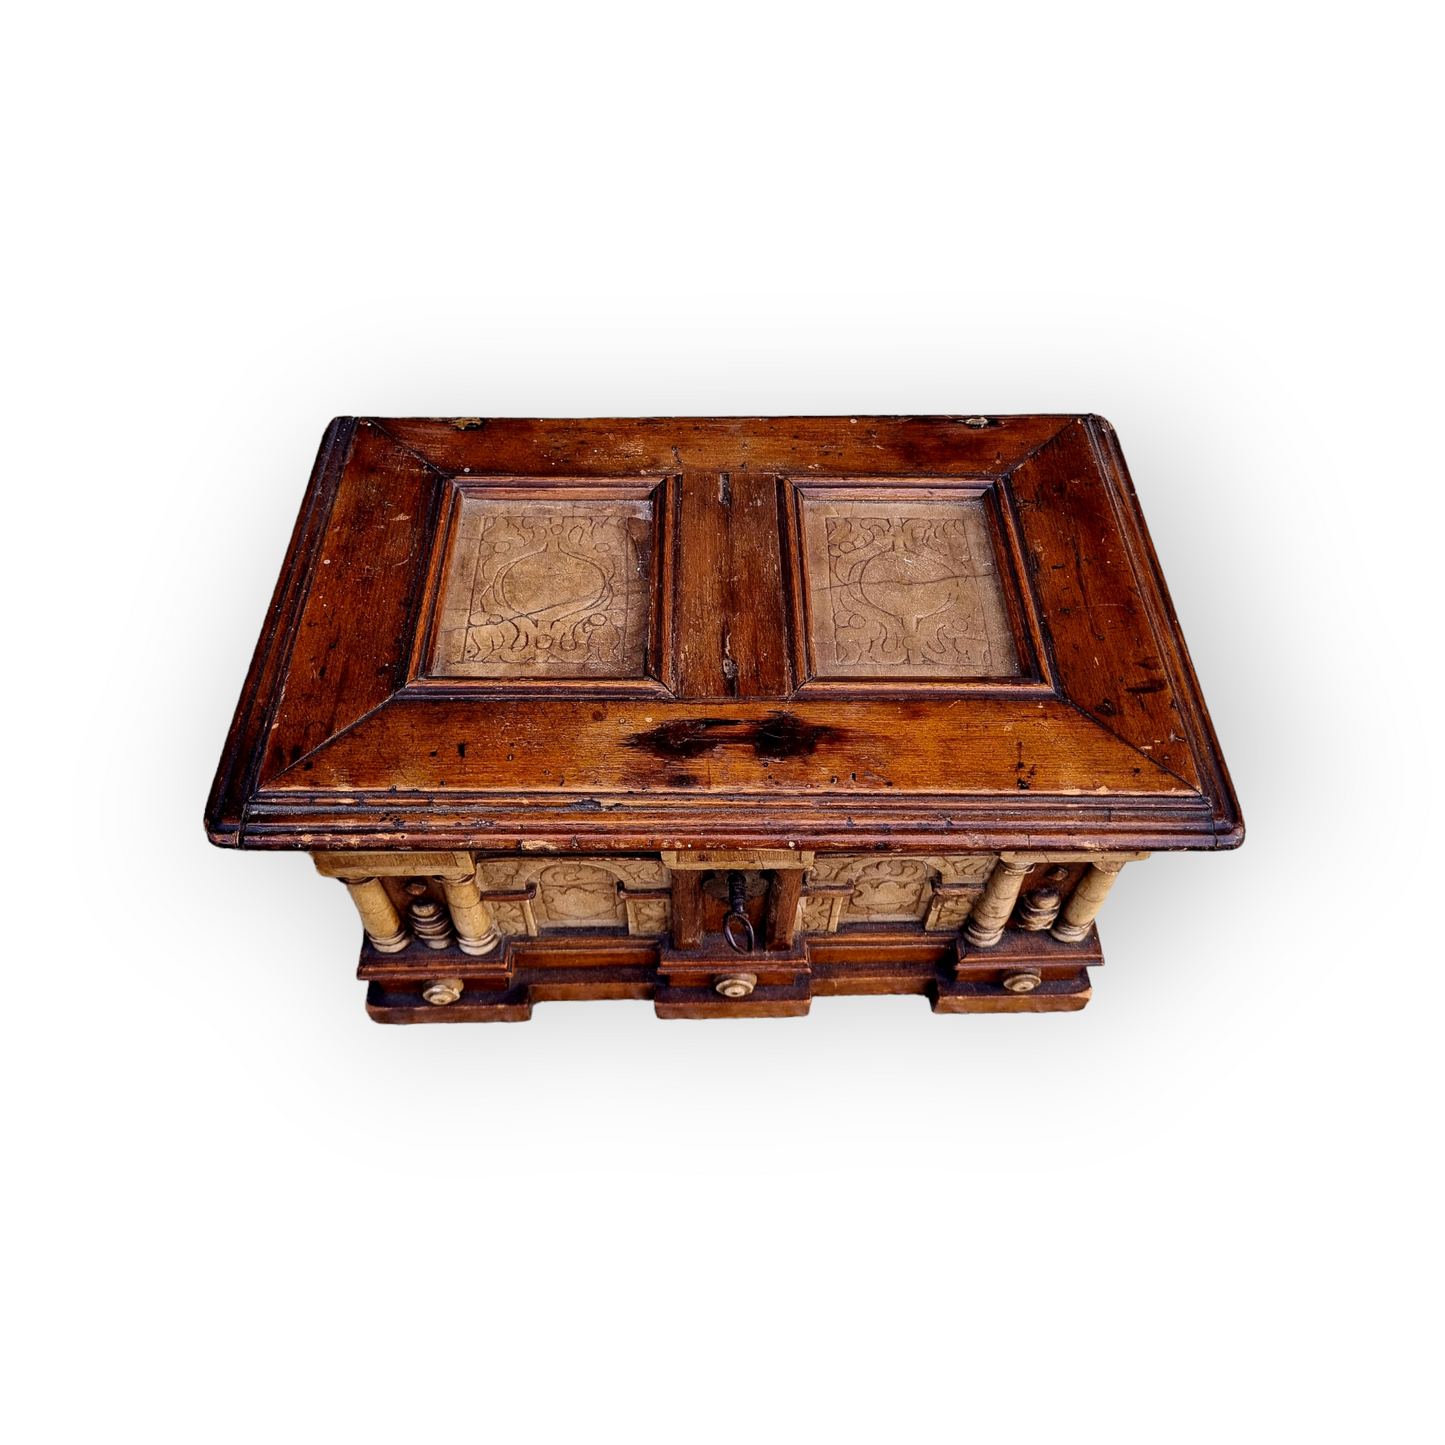 Early 17th Century Flemish Antique Malines Alabaster Table Box or Casket, Circa 1600